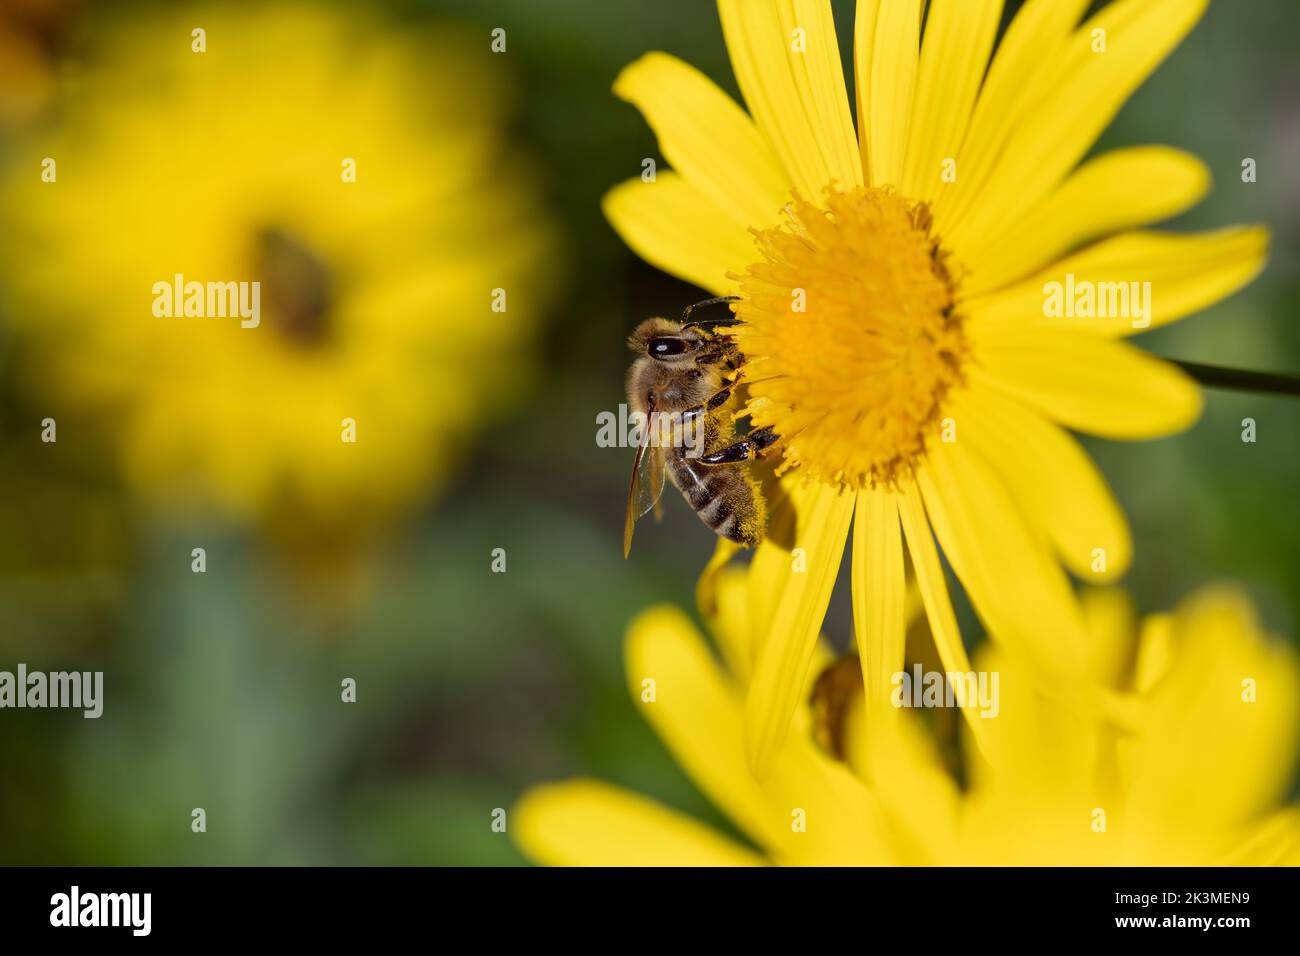 A small honey bee sits on a large yellow flower and searches for pollen. Stock Photo